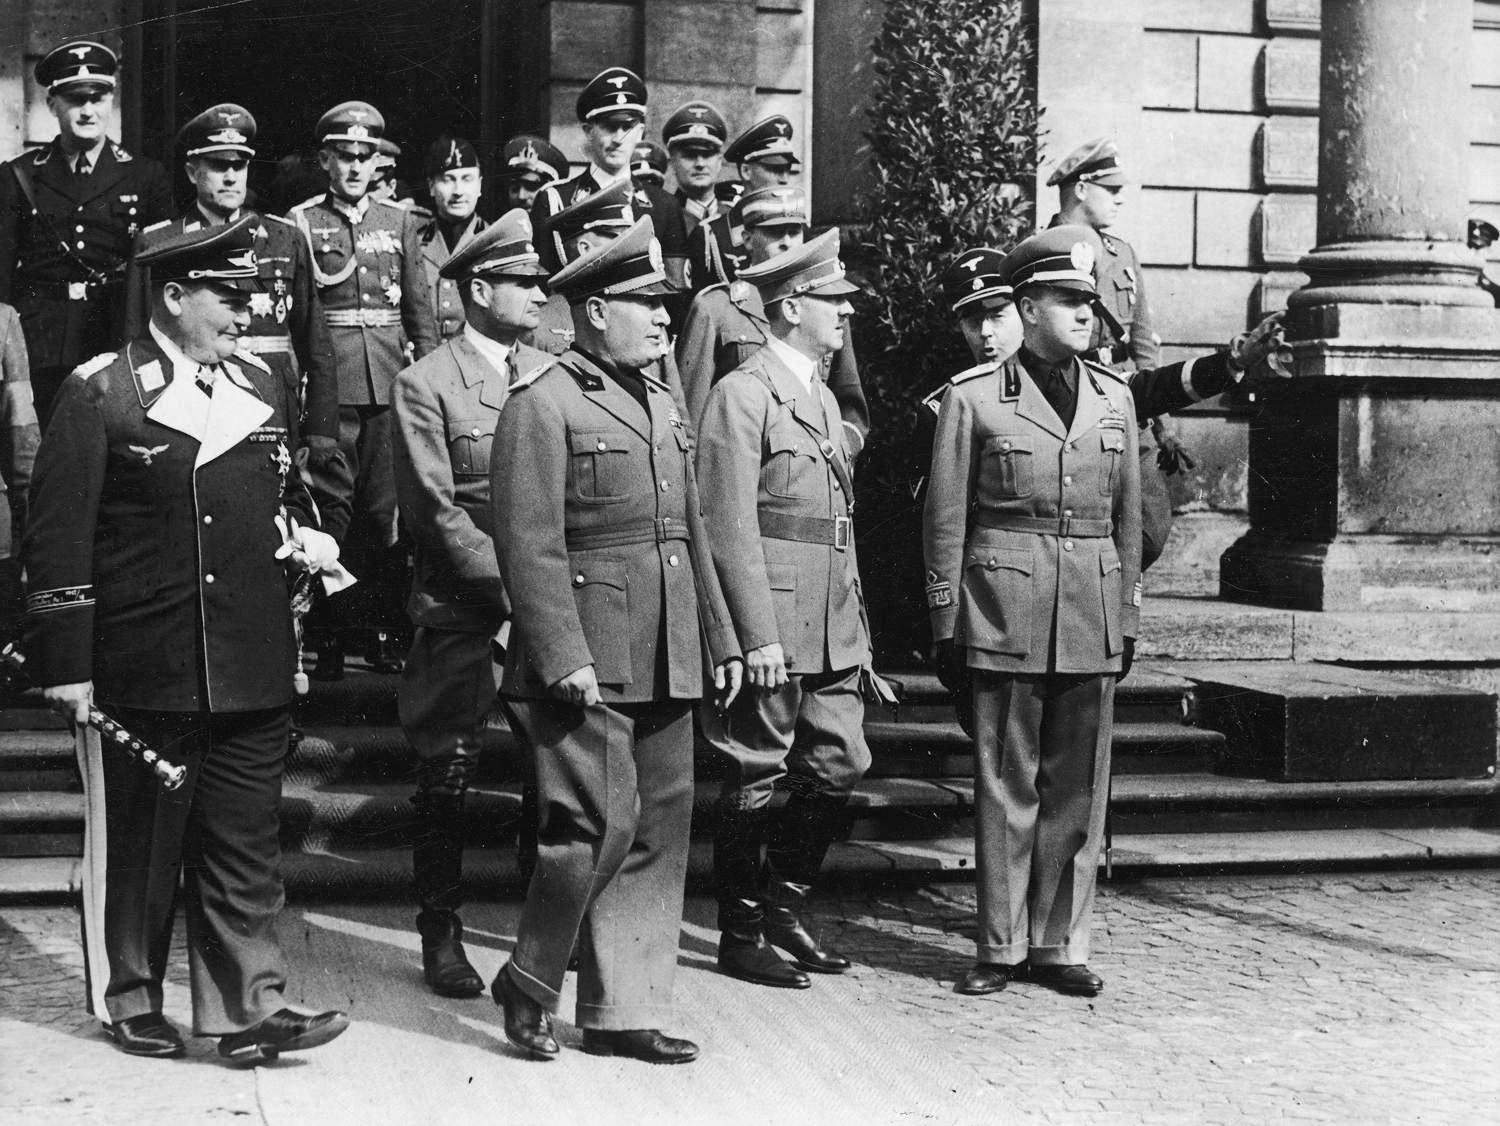 Adolf Hitler leaves Munich's station with Mussolini, Ciano and his staff before the Munich conference